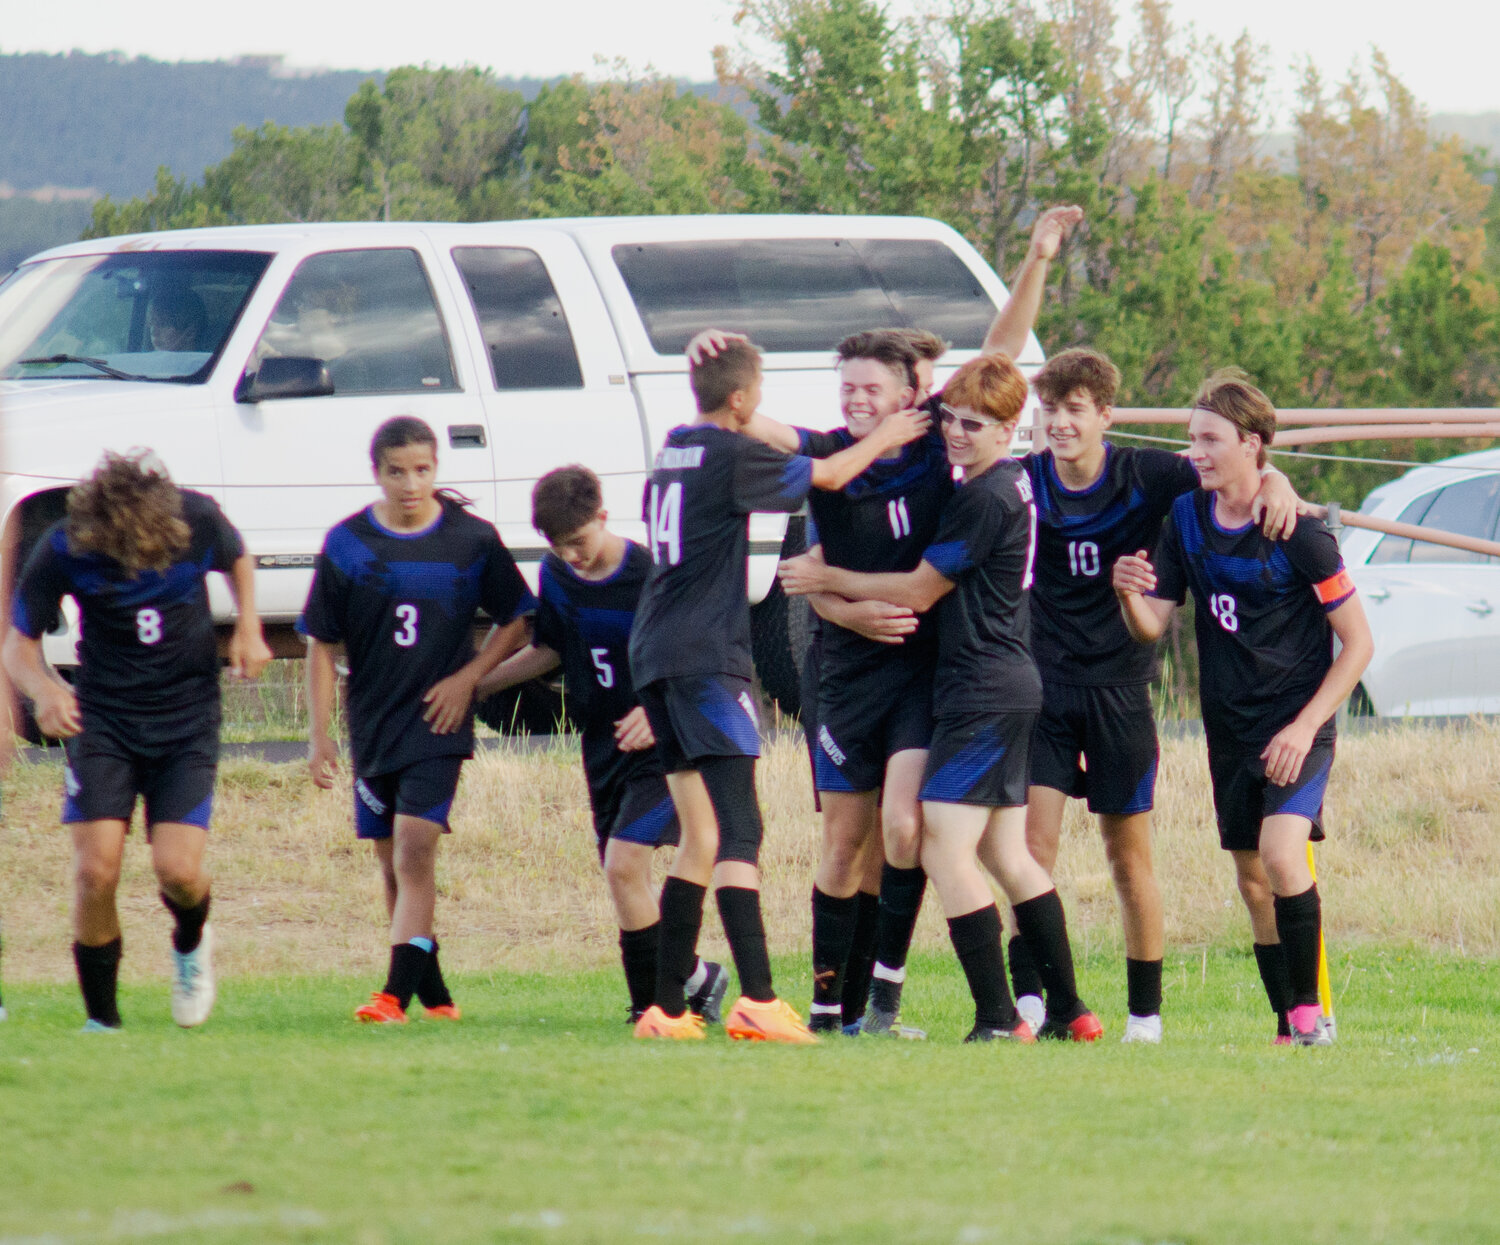 Trevor Head (11) celebrates a goal with his east Mountain teammates. It is a scene that would replay itself many times this season.